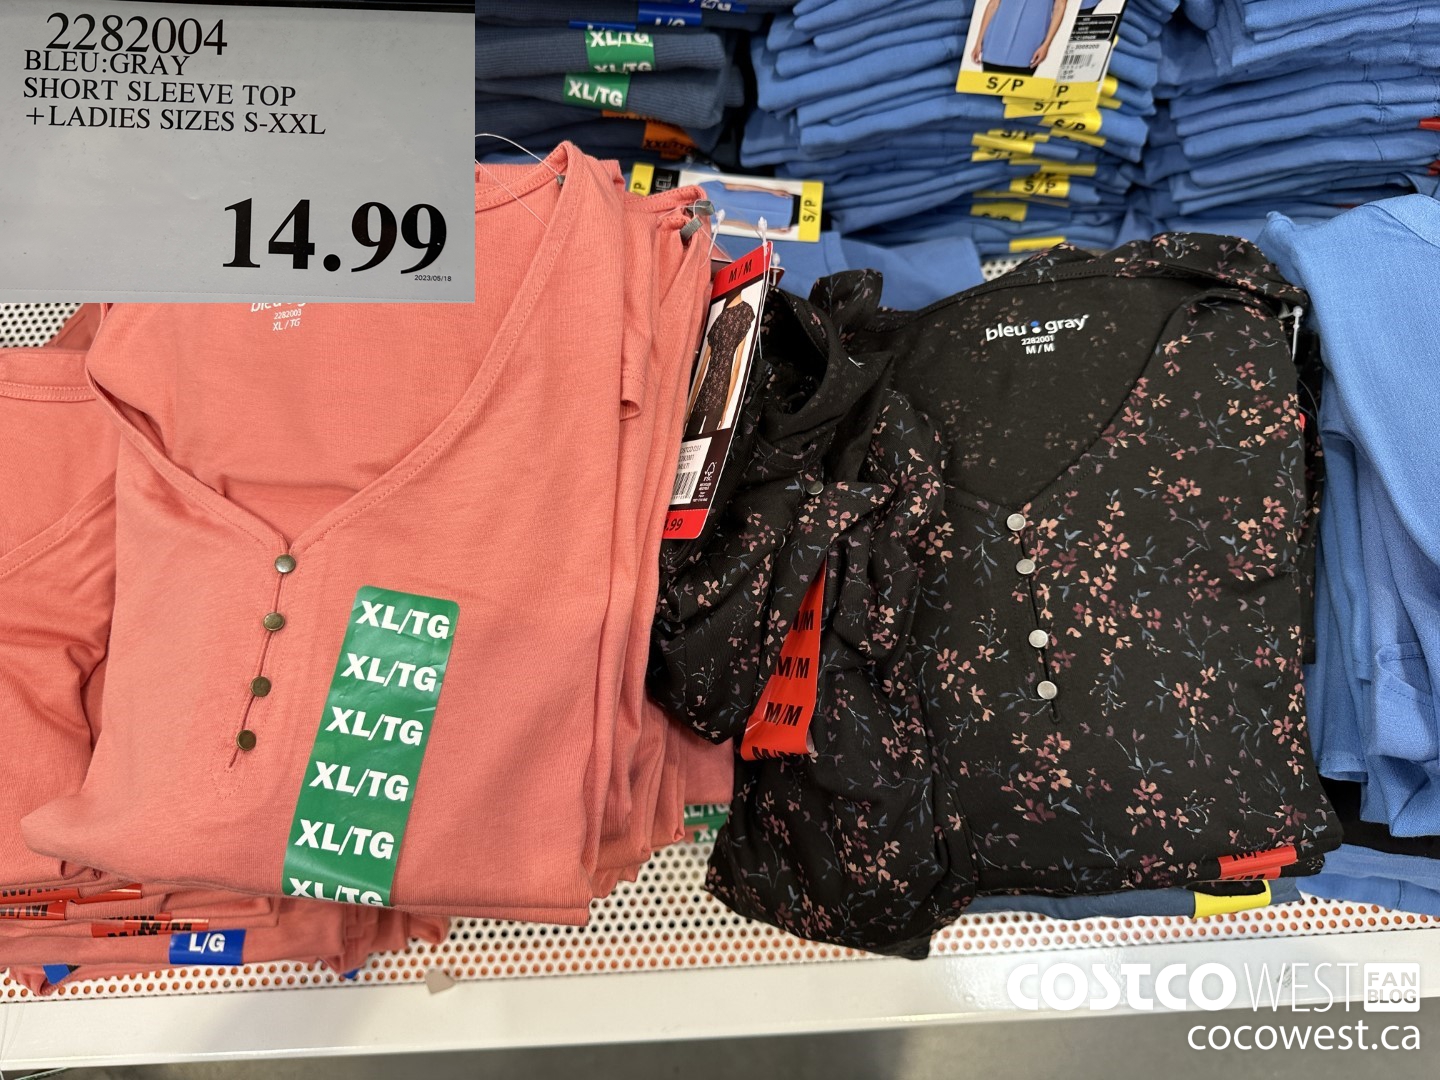 theCostcoConnoisseur on X: Save on @felinaintimates Ladies 2-piece lounge  set - marked down to just $14.97! #costco #felina #markdownmonday  #costcomarkdowns #costcofinds #costcofind #costcodeals #costcobuys  #TheCostcoConnoisseur #GoingToAllTheCostcos